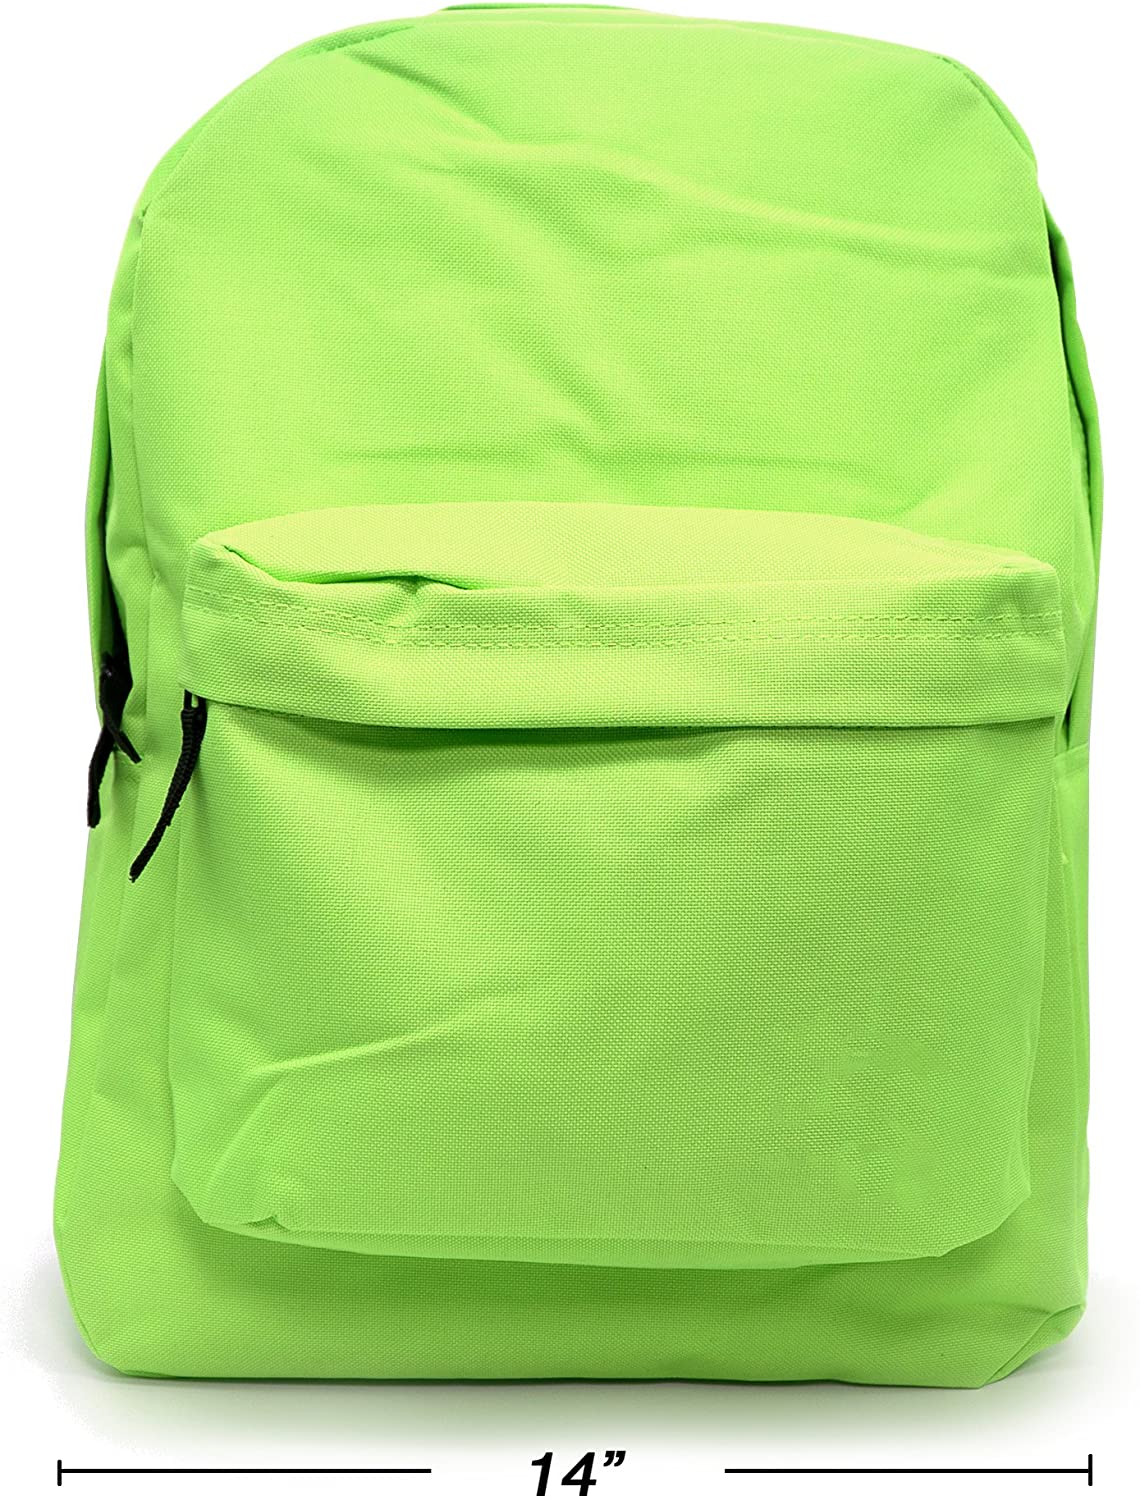 Emraw Multipurpose Schoolbag Travel Backpack For Girls Casual Security Backpack Women Rucksack with Trim Adjustable Straps Fashion Backpack Office School Laptop Bag, Lime Green Classic - image 3 of 4